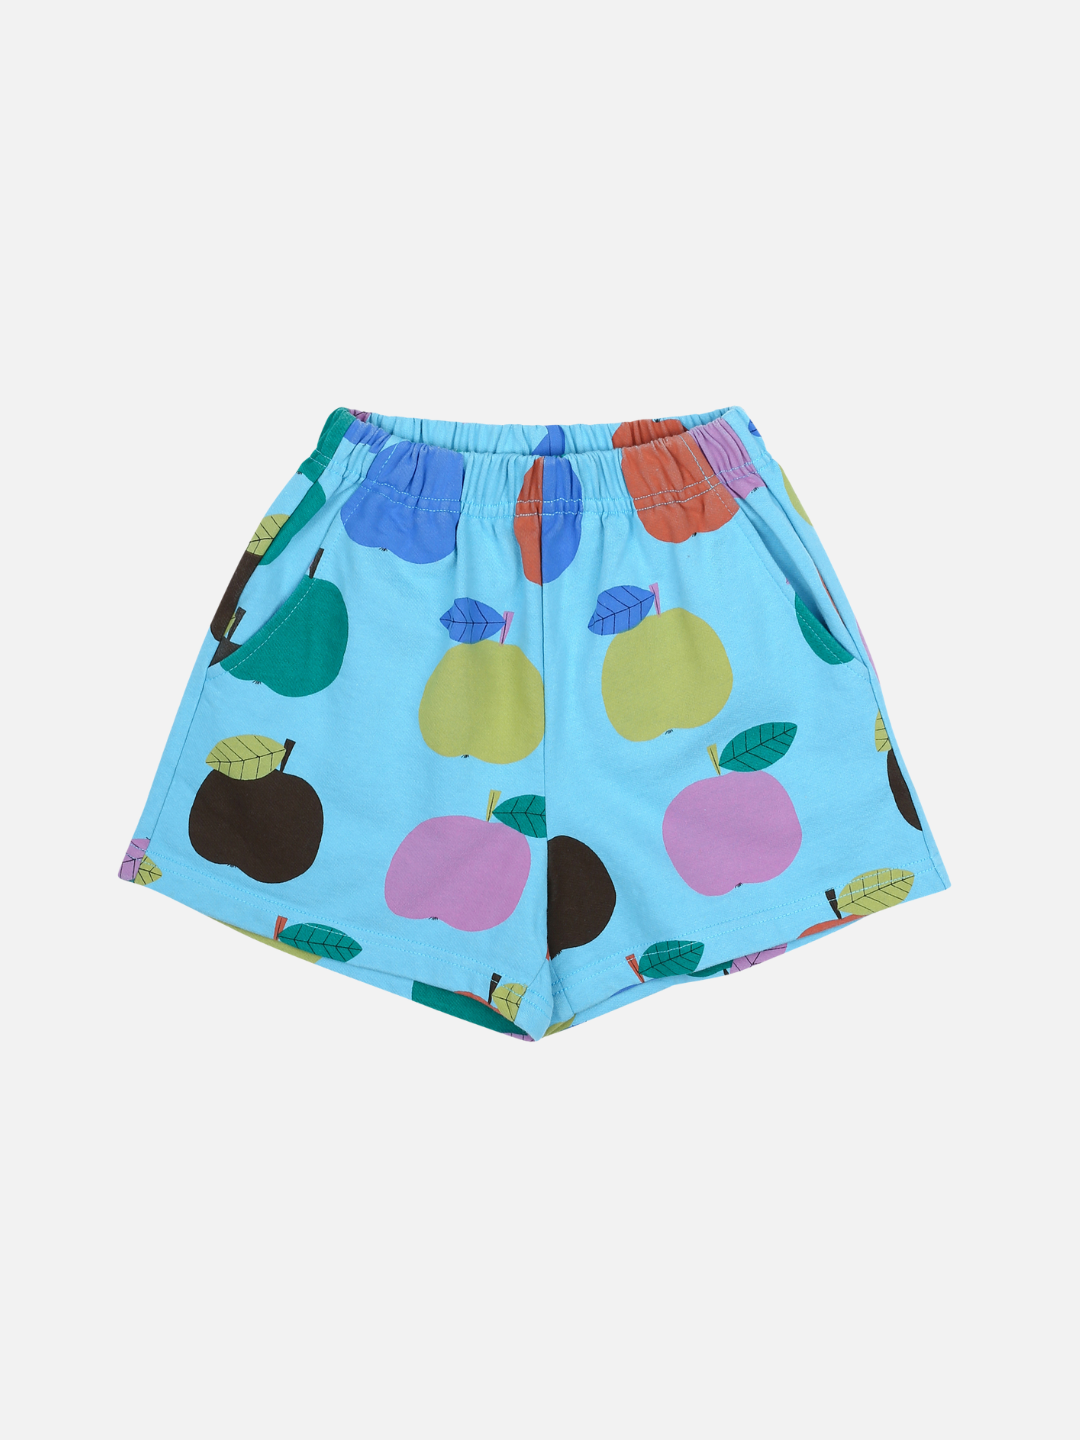 Front of Colorful Apple Shorts. Multi-colored apple print on a light blue background with an elastic waist.